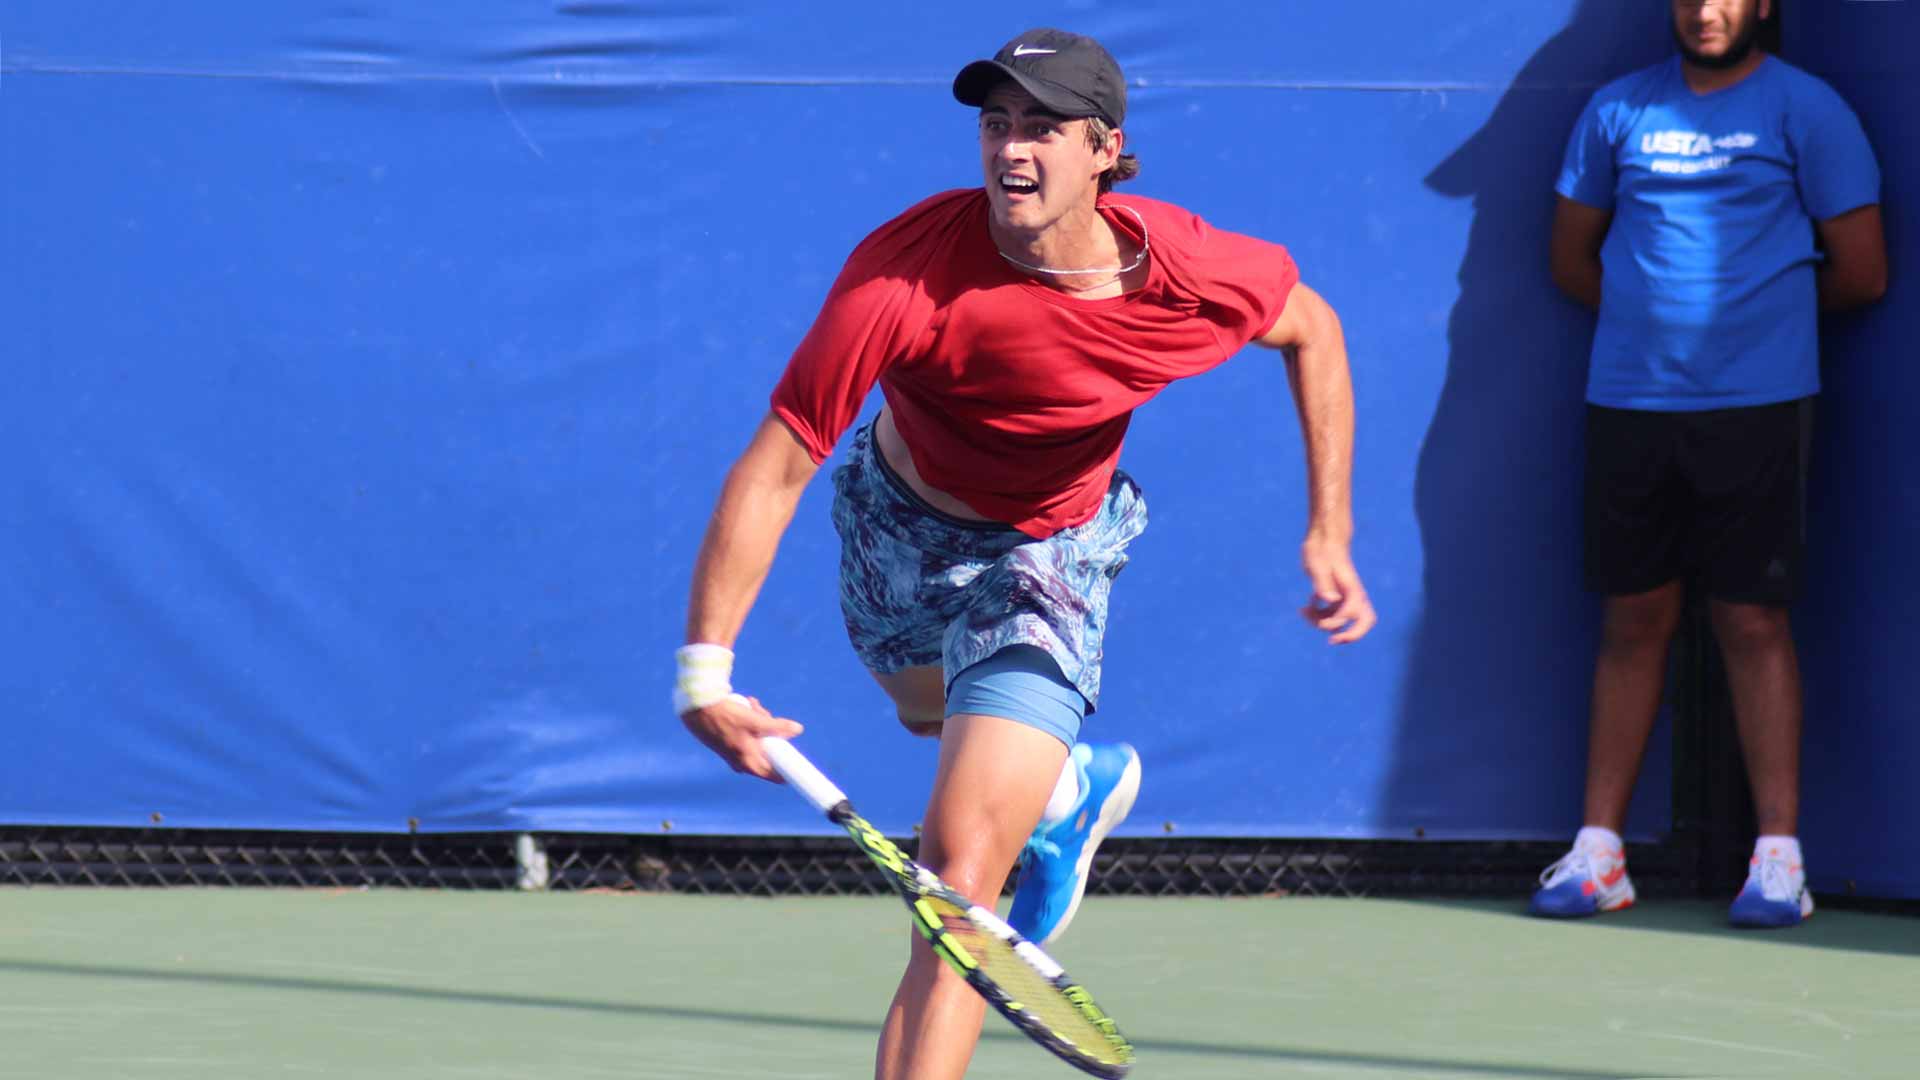 Adam Walton in action at the Cary Challenger in August.